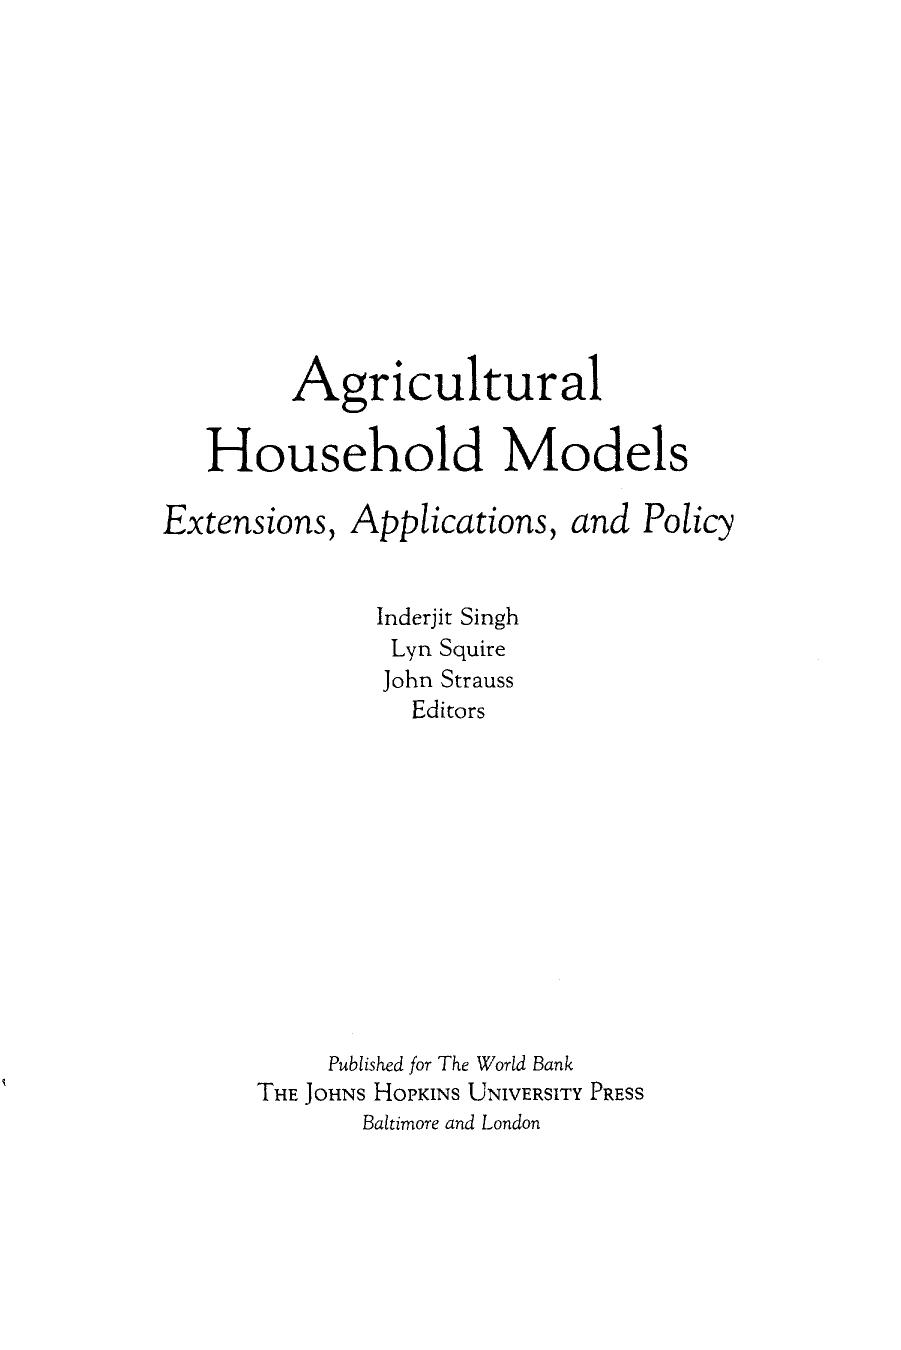 Agricultural Household Models: Models, Extensions, and Policy